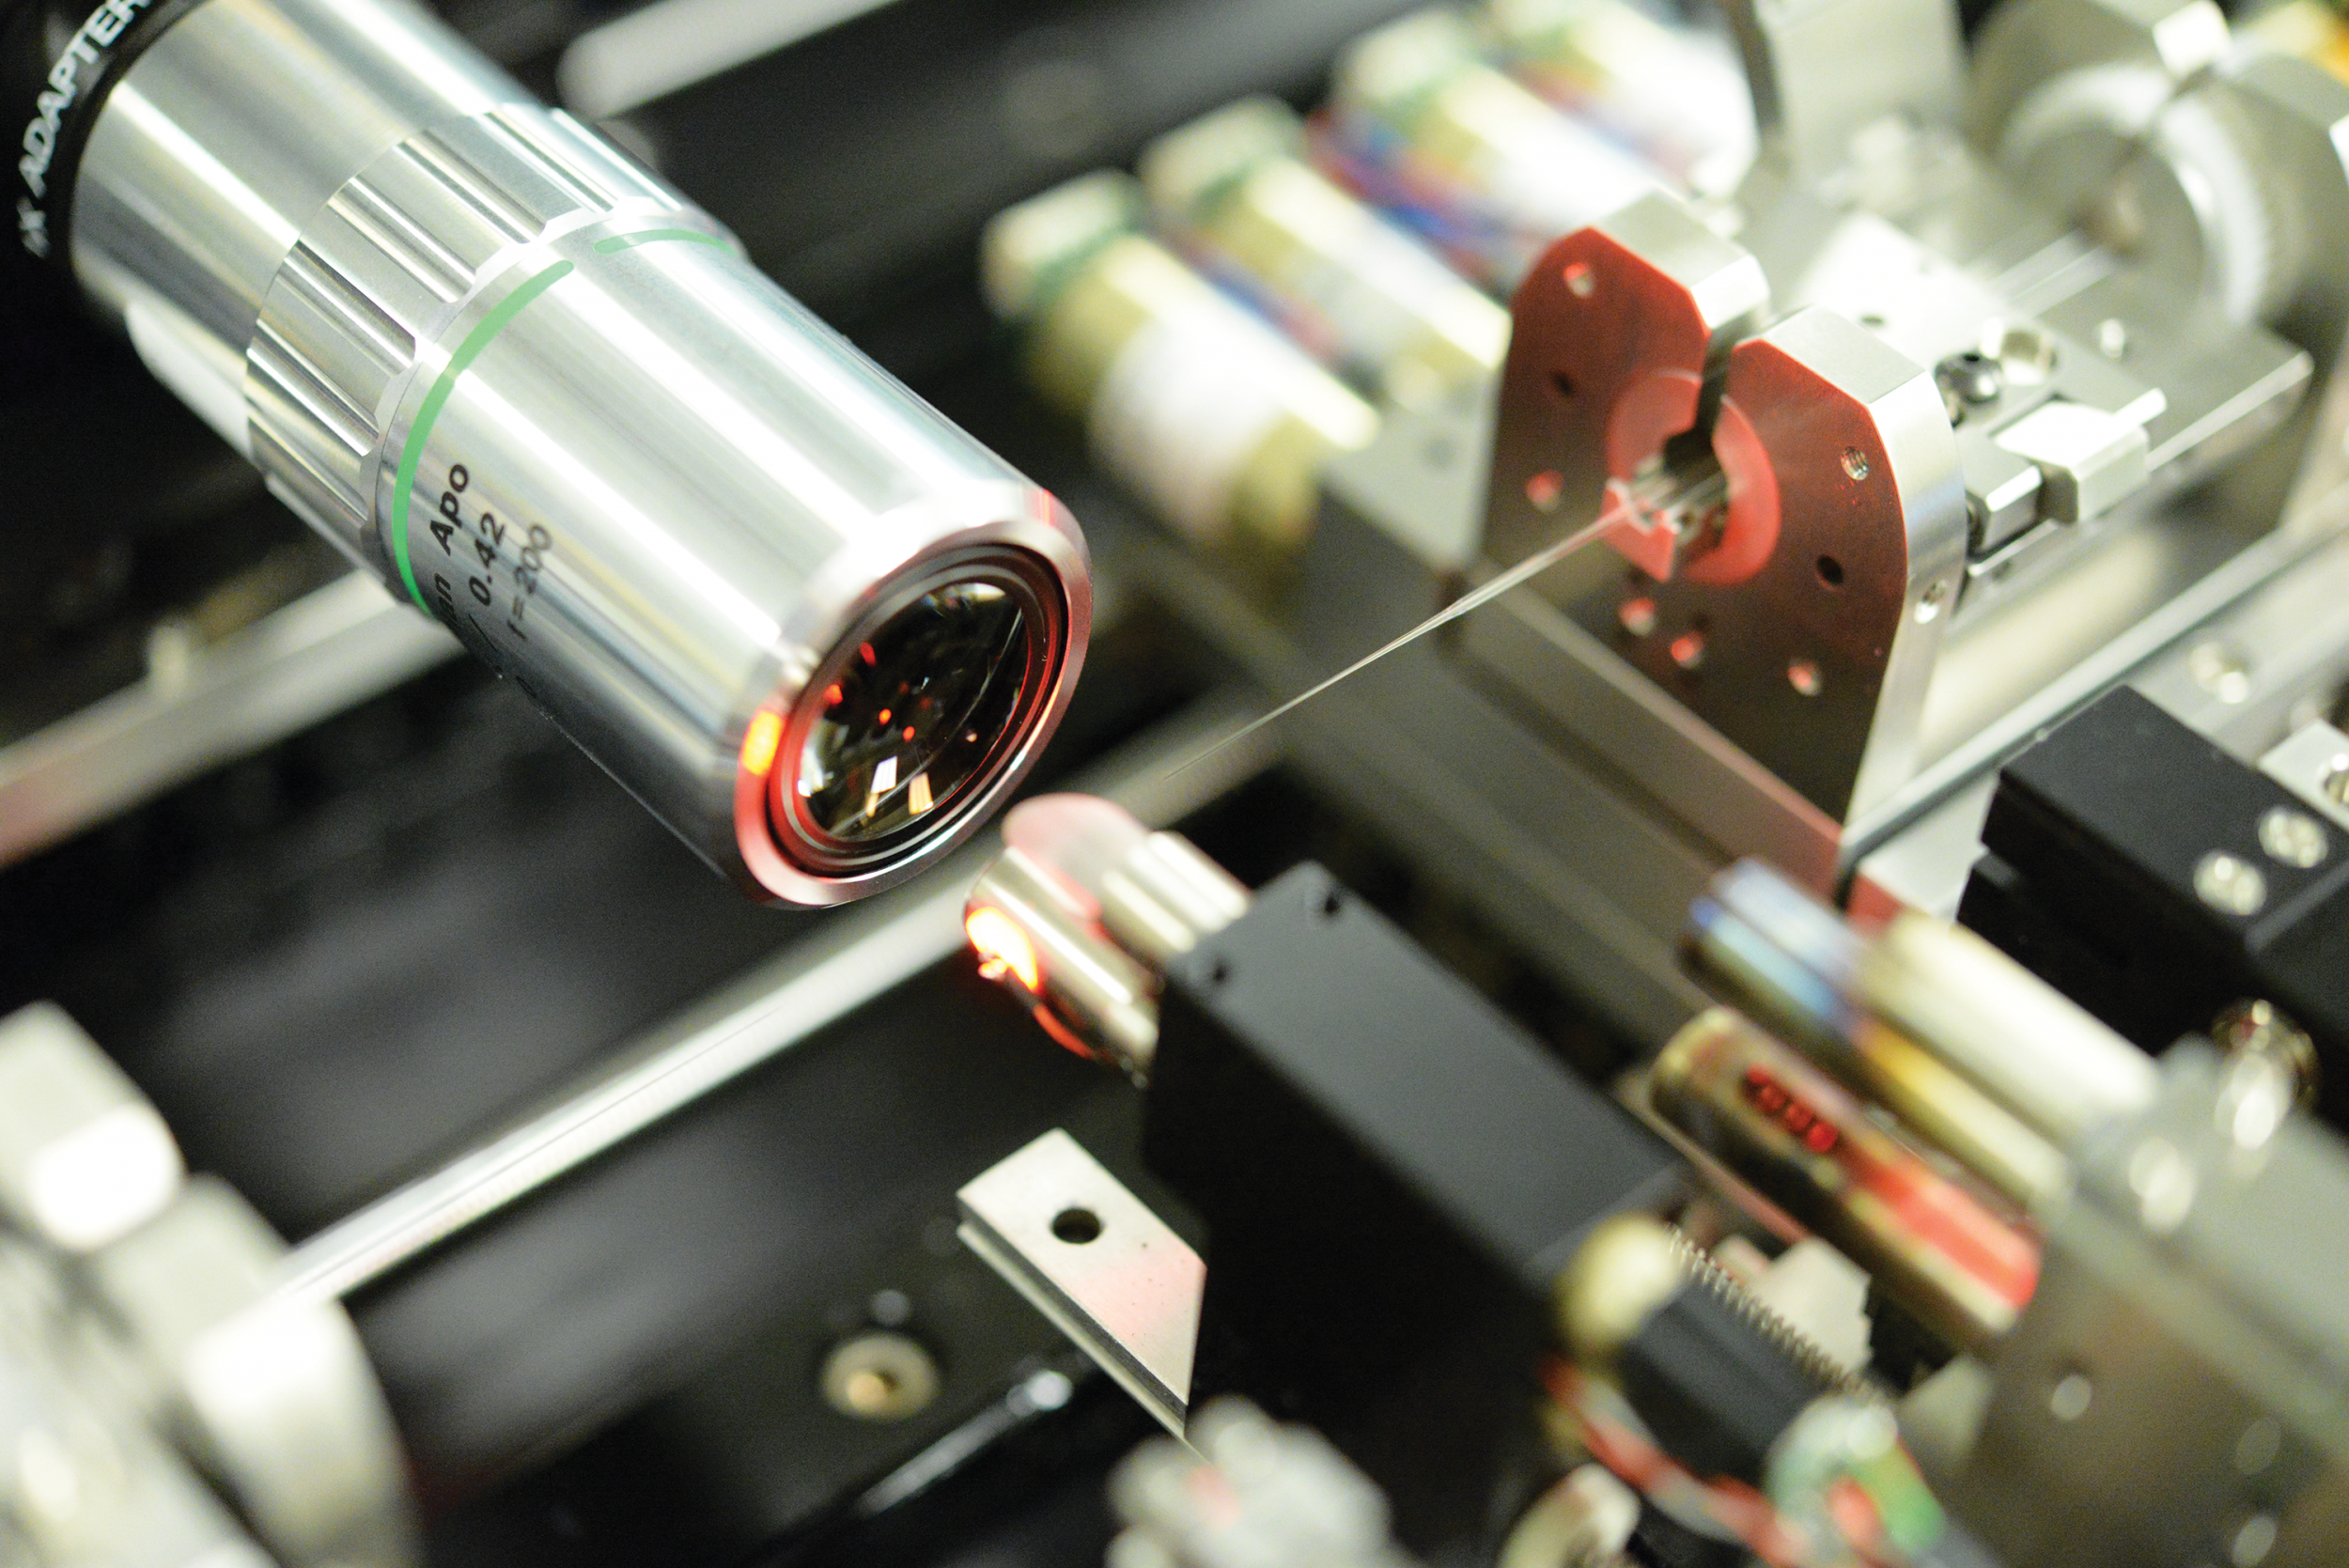 The tip of the photonic lantern is inspected with a microscope prior to being spliced into a kilowatt-class amplifier. 